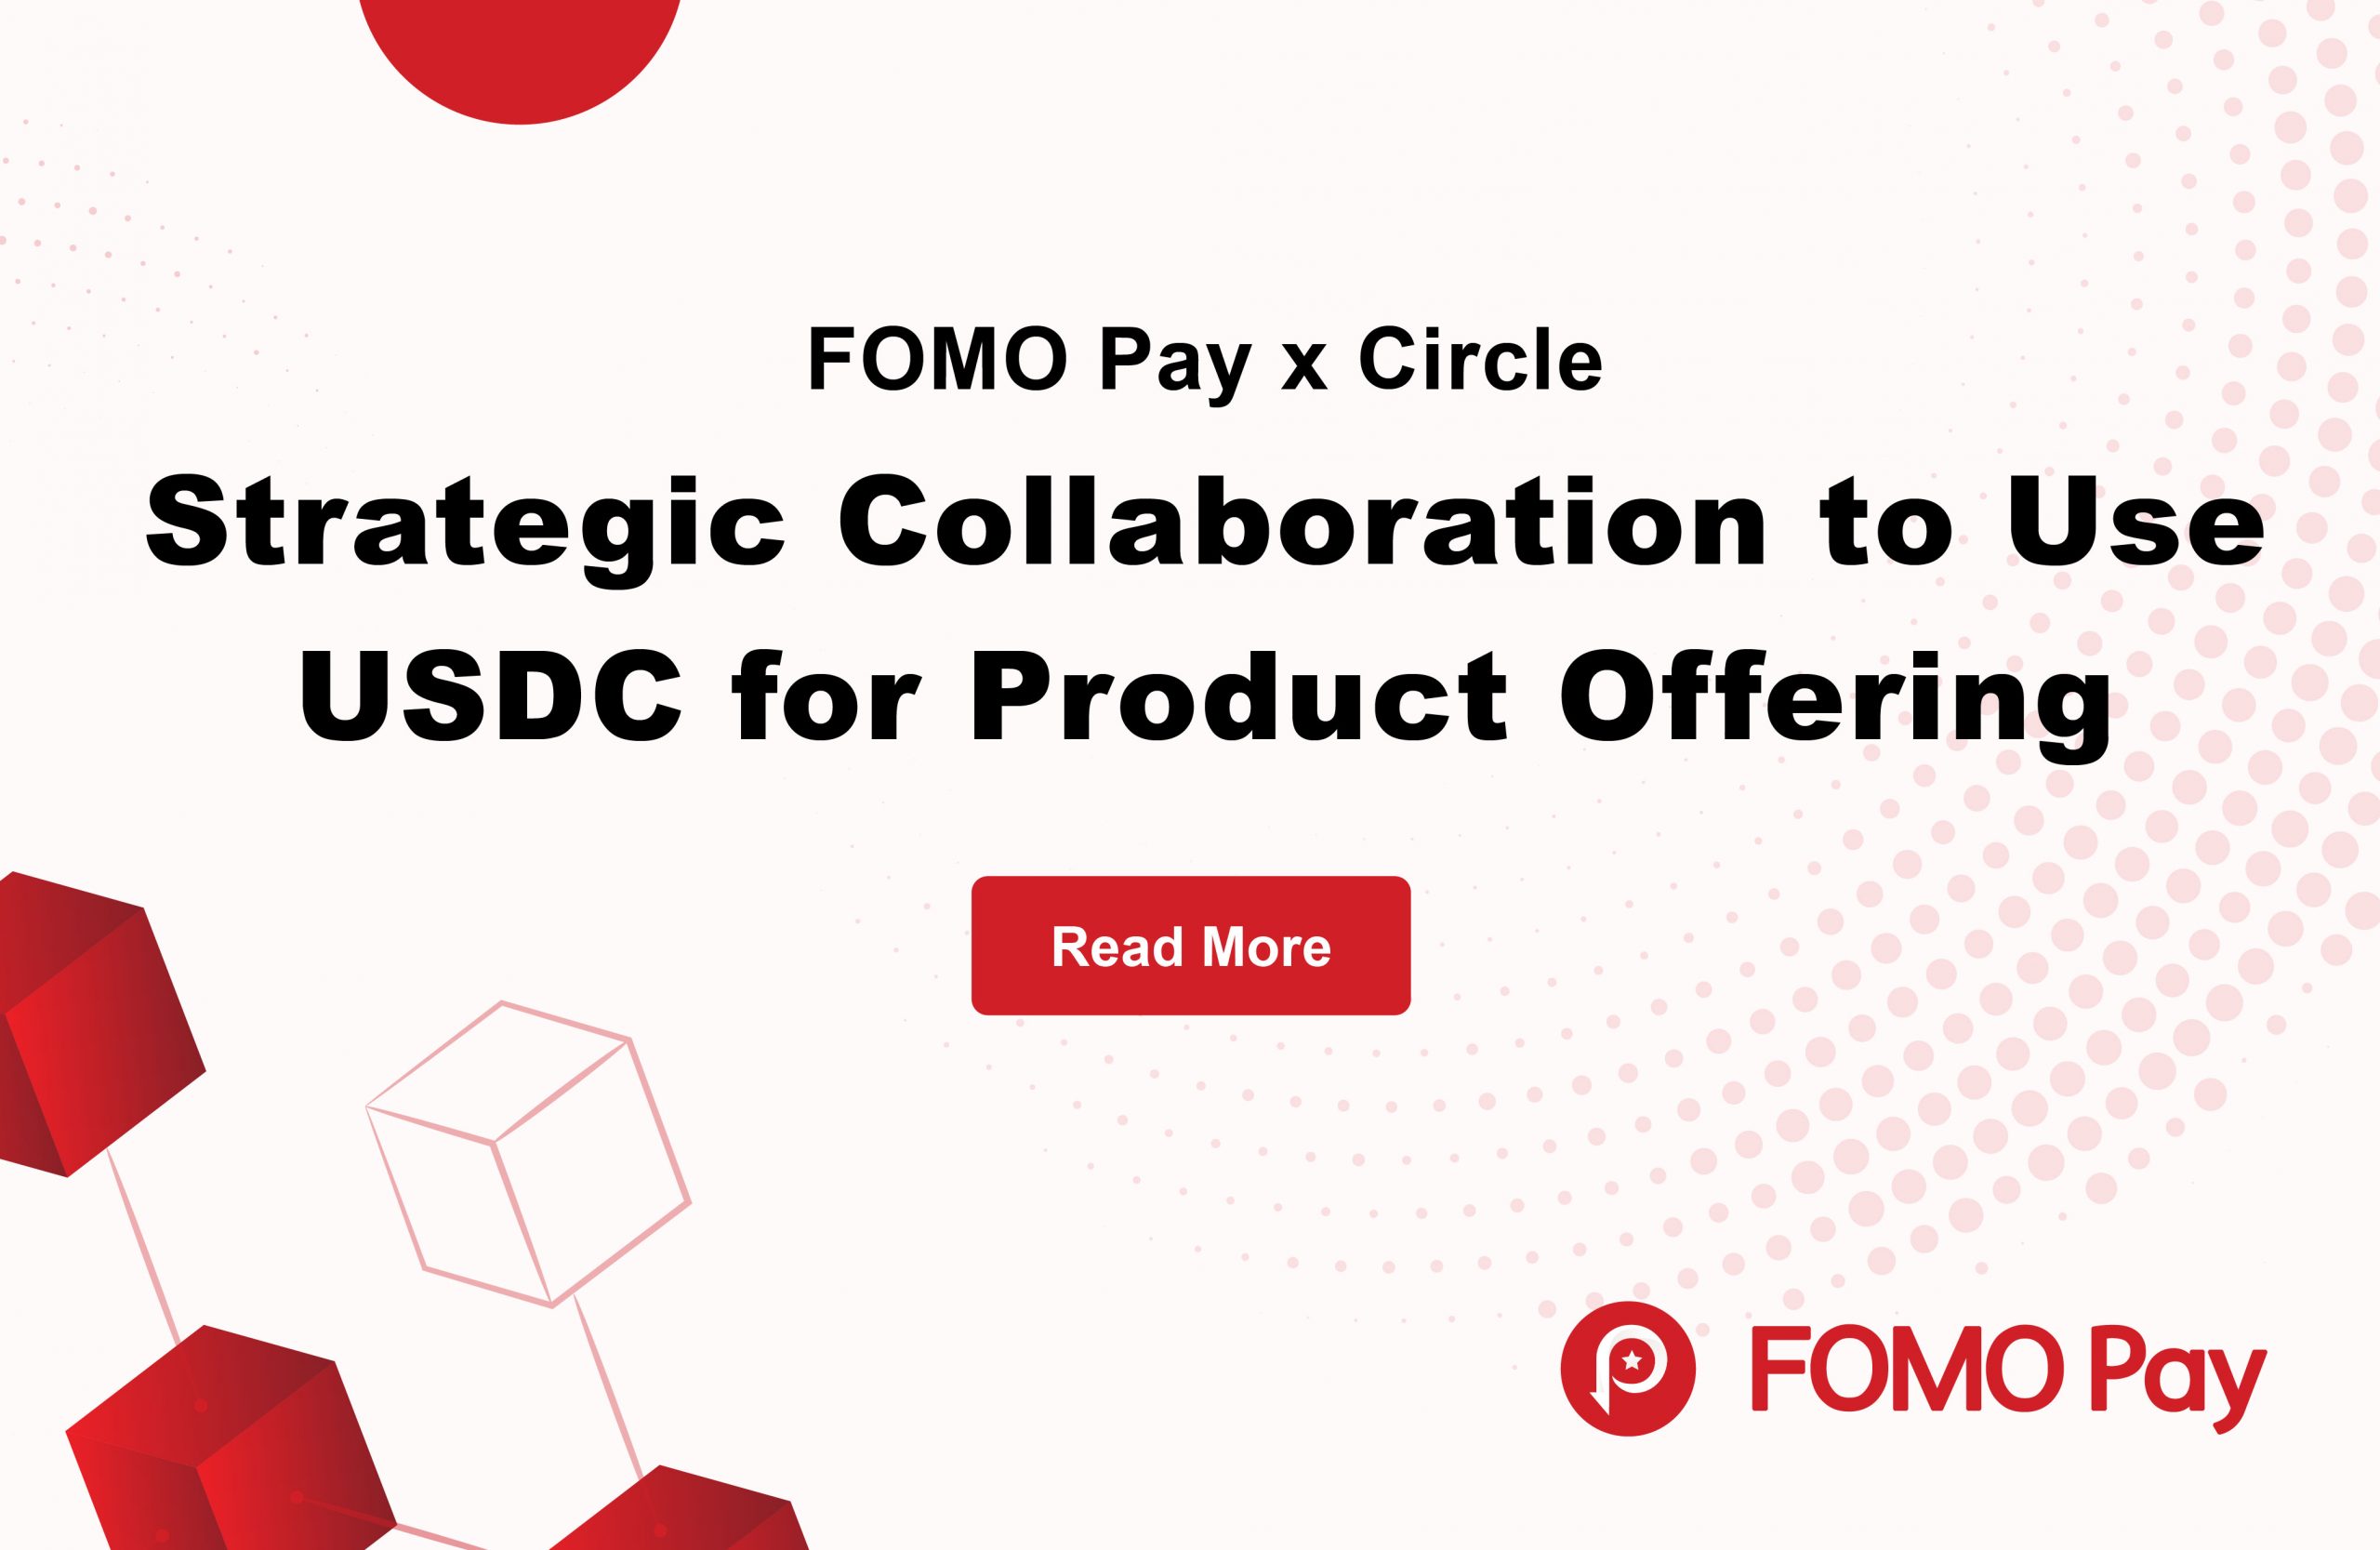 FOMO Pay Forges Strategic Collaboration with Circle to Use USDC for Product Offering